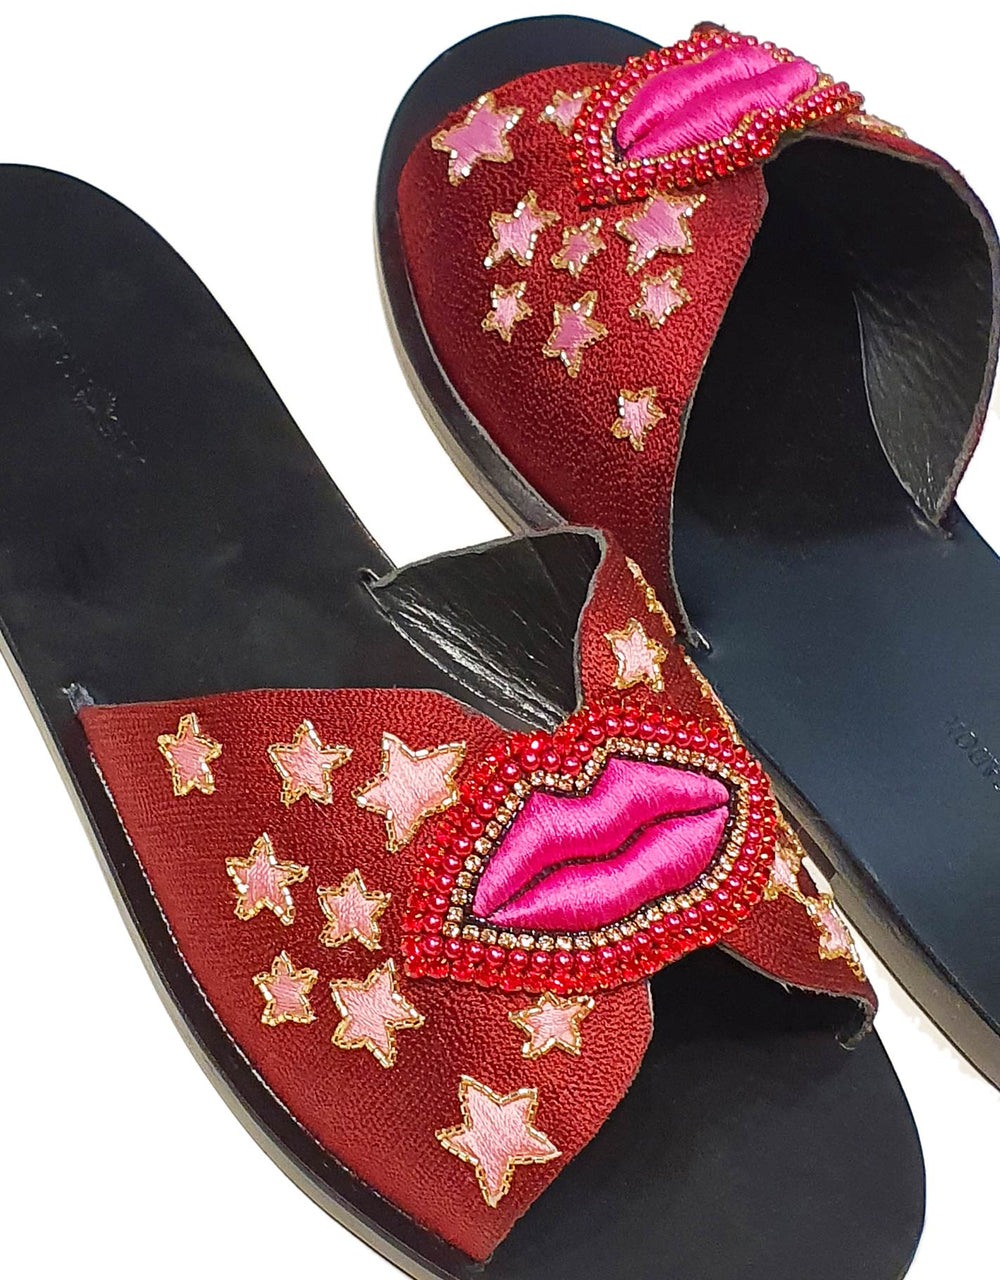 "Fuchsia pink mouth" sandals